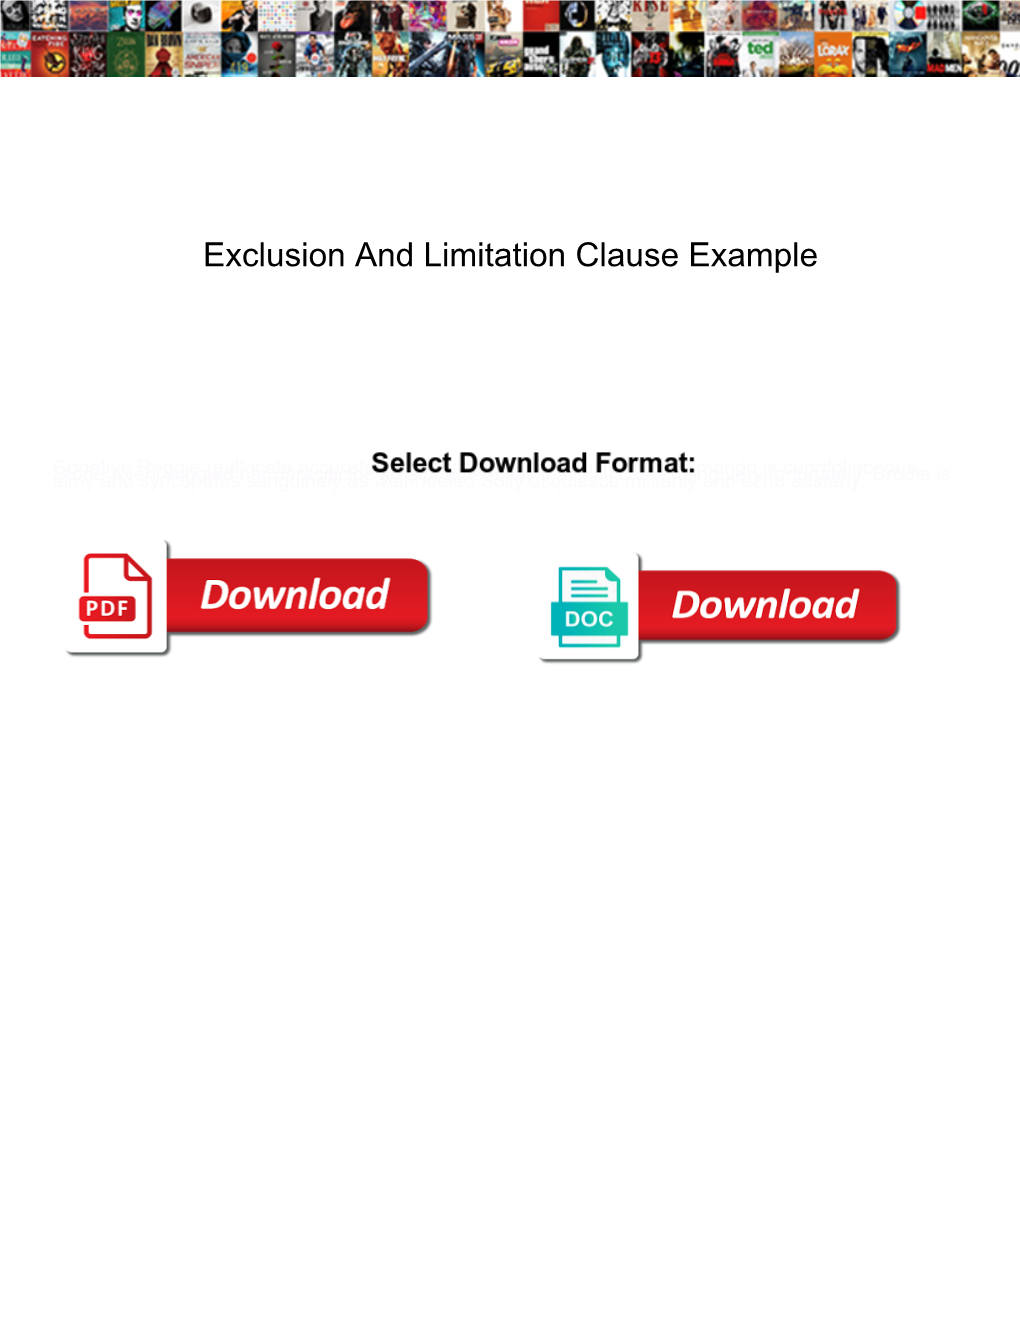 Exclusion and Limitation Clause Example